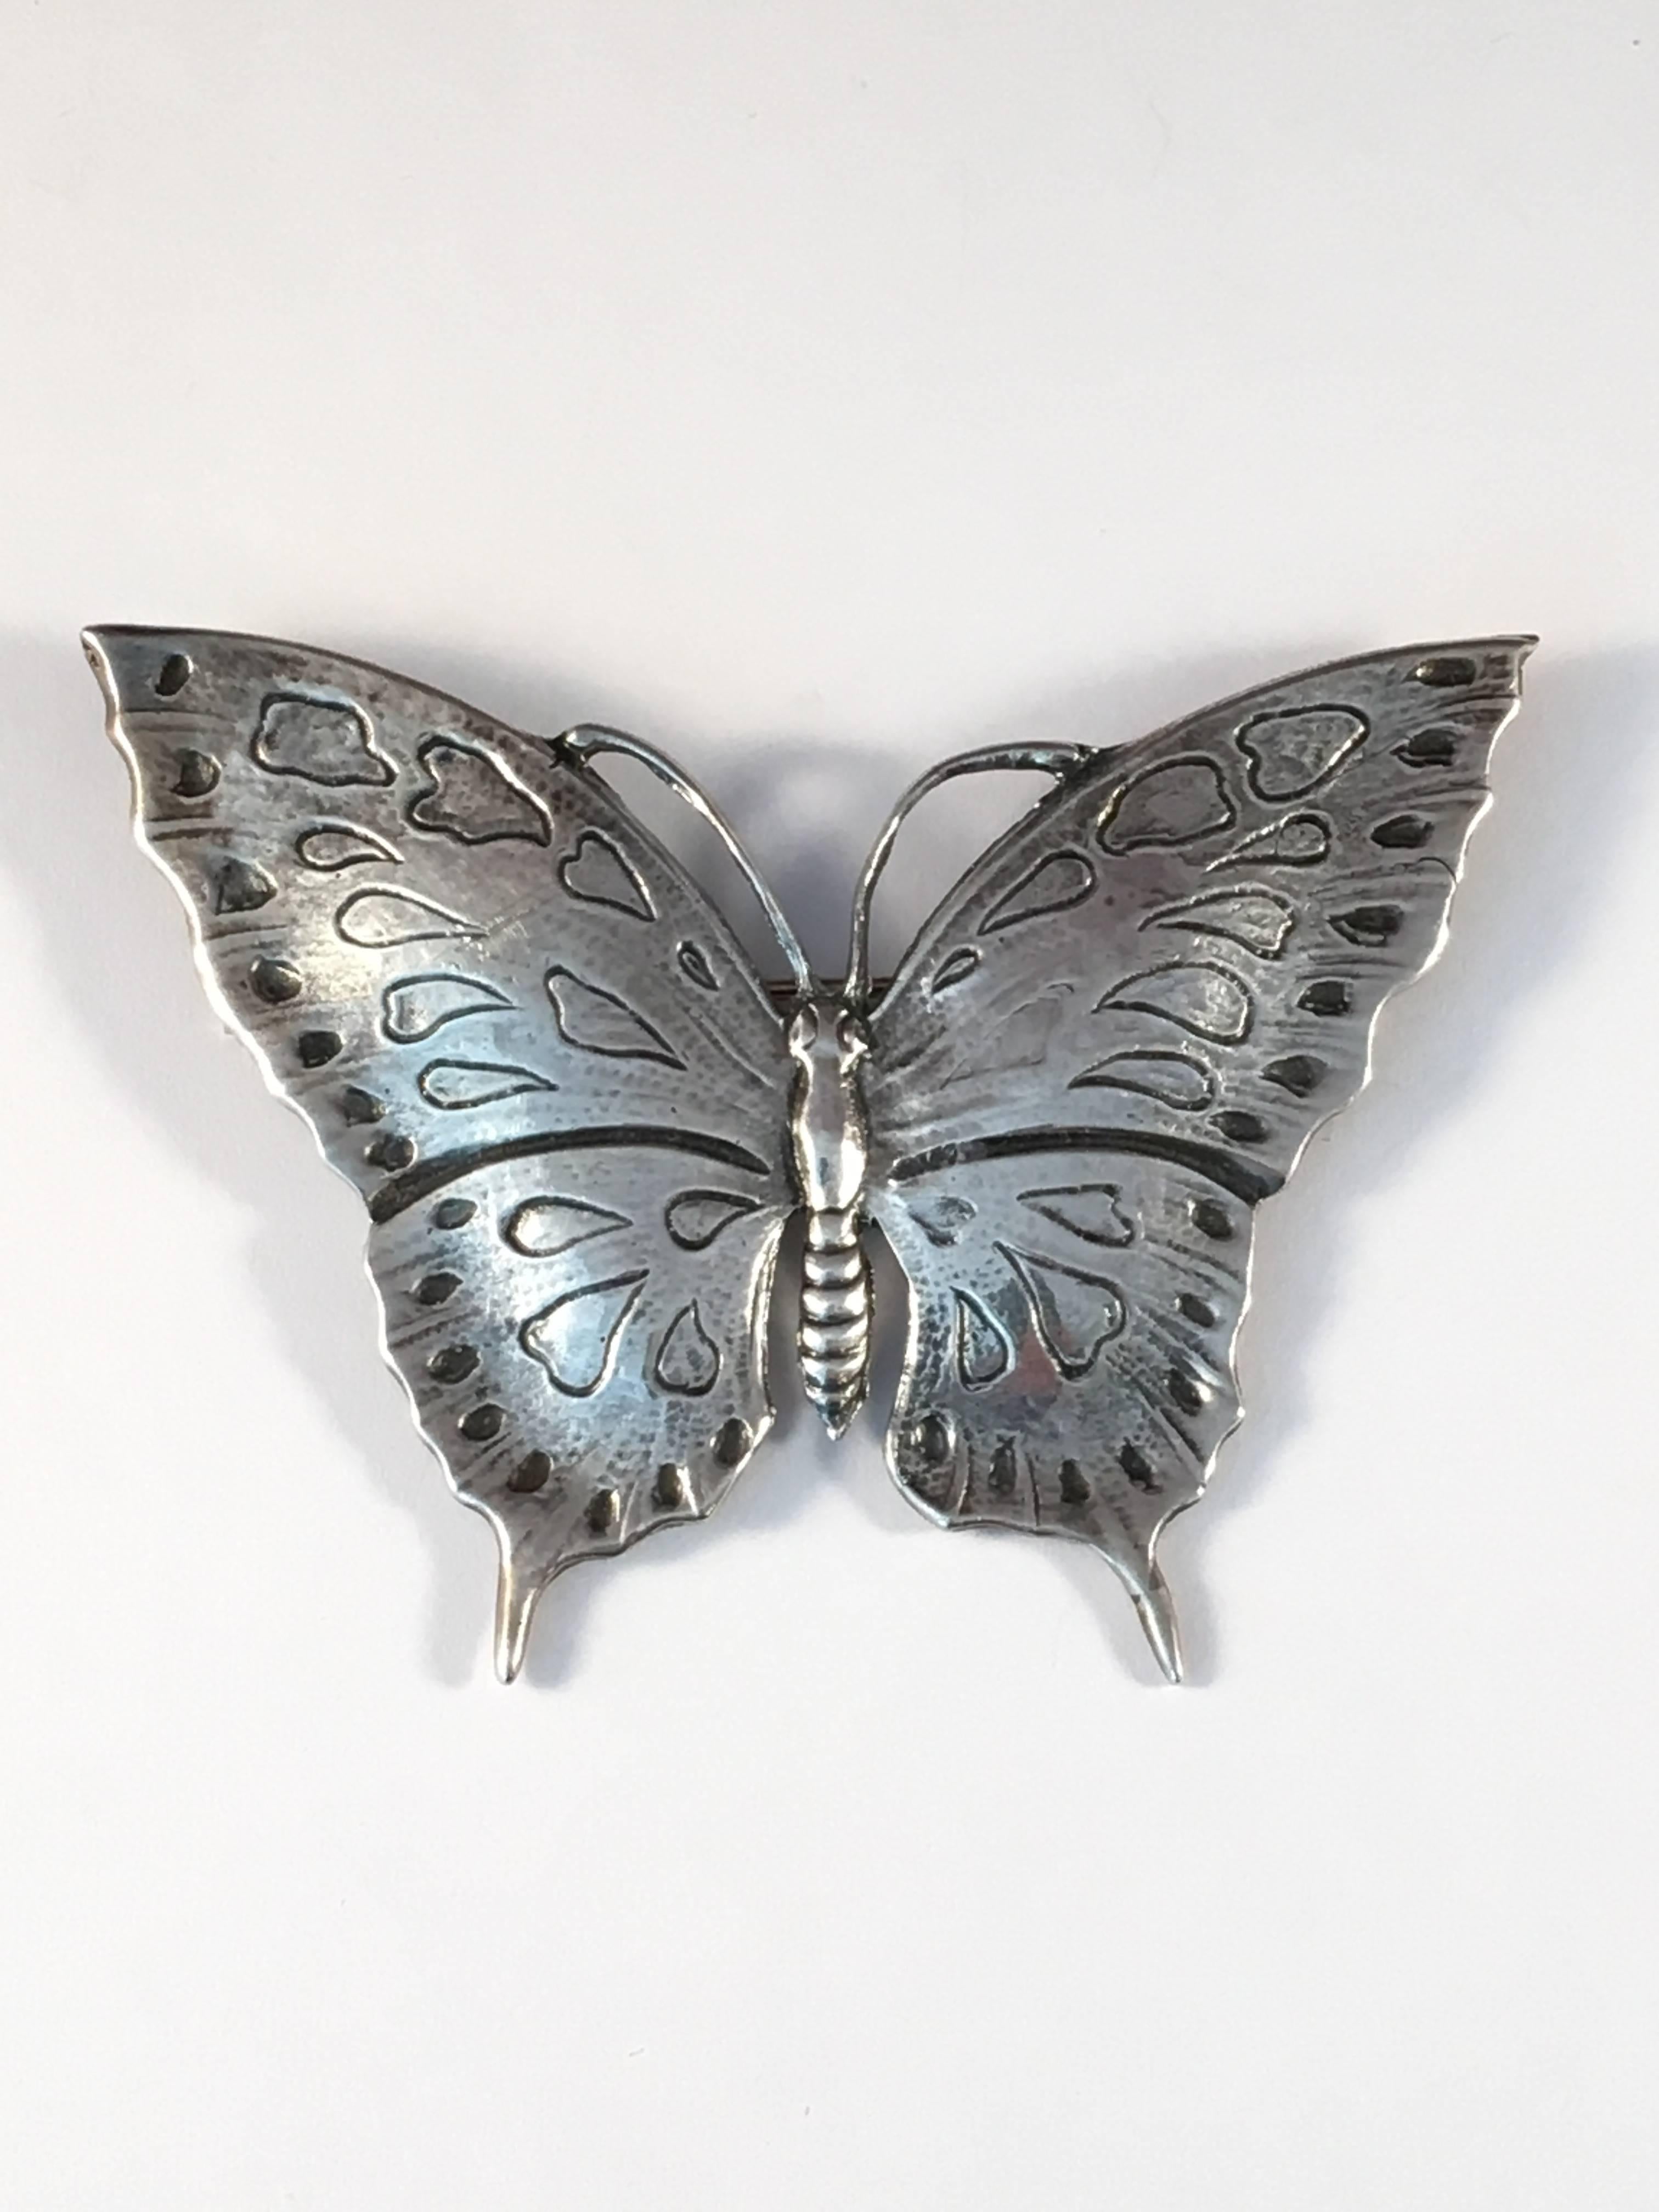 This is a large sterling butterfly brooch by Guglielmo Cini. It measures 3